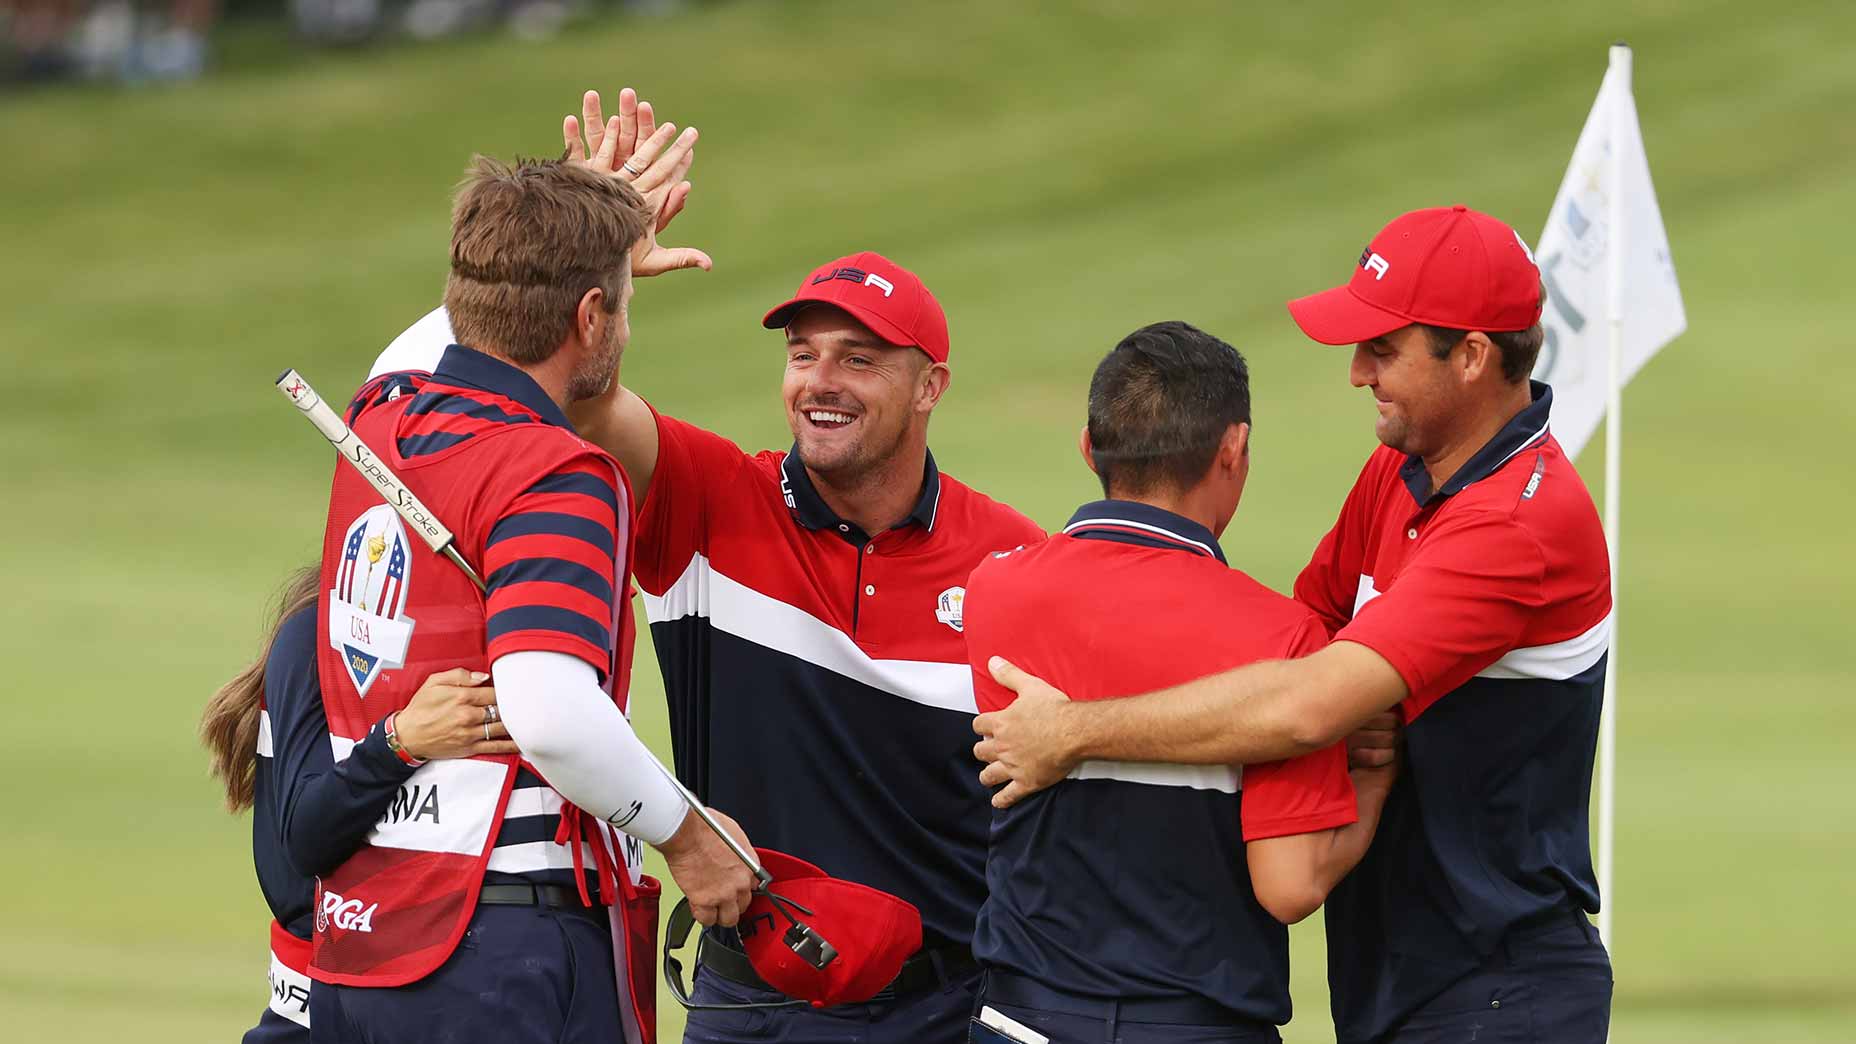 Ryder Cup 2021 Highpowered U.S. beats Europe to win 43rd Ryder Cup